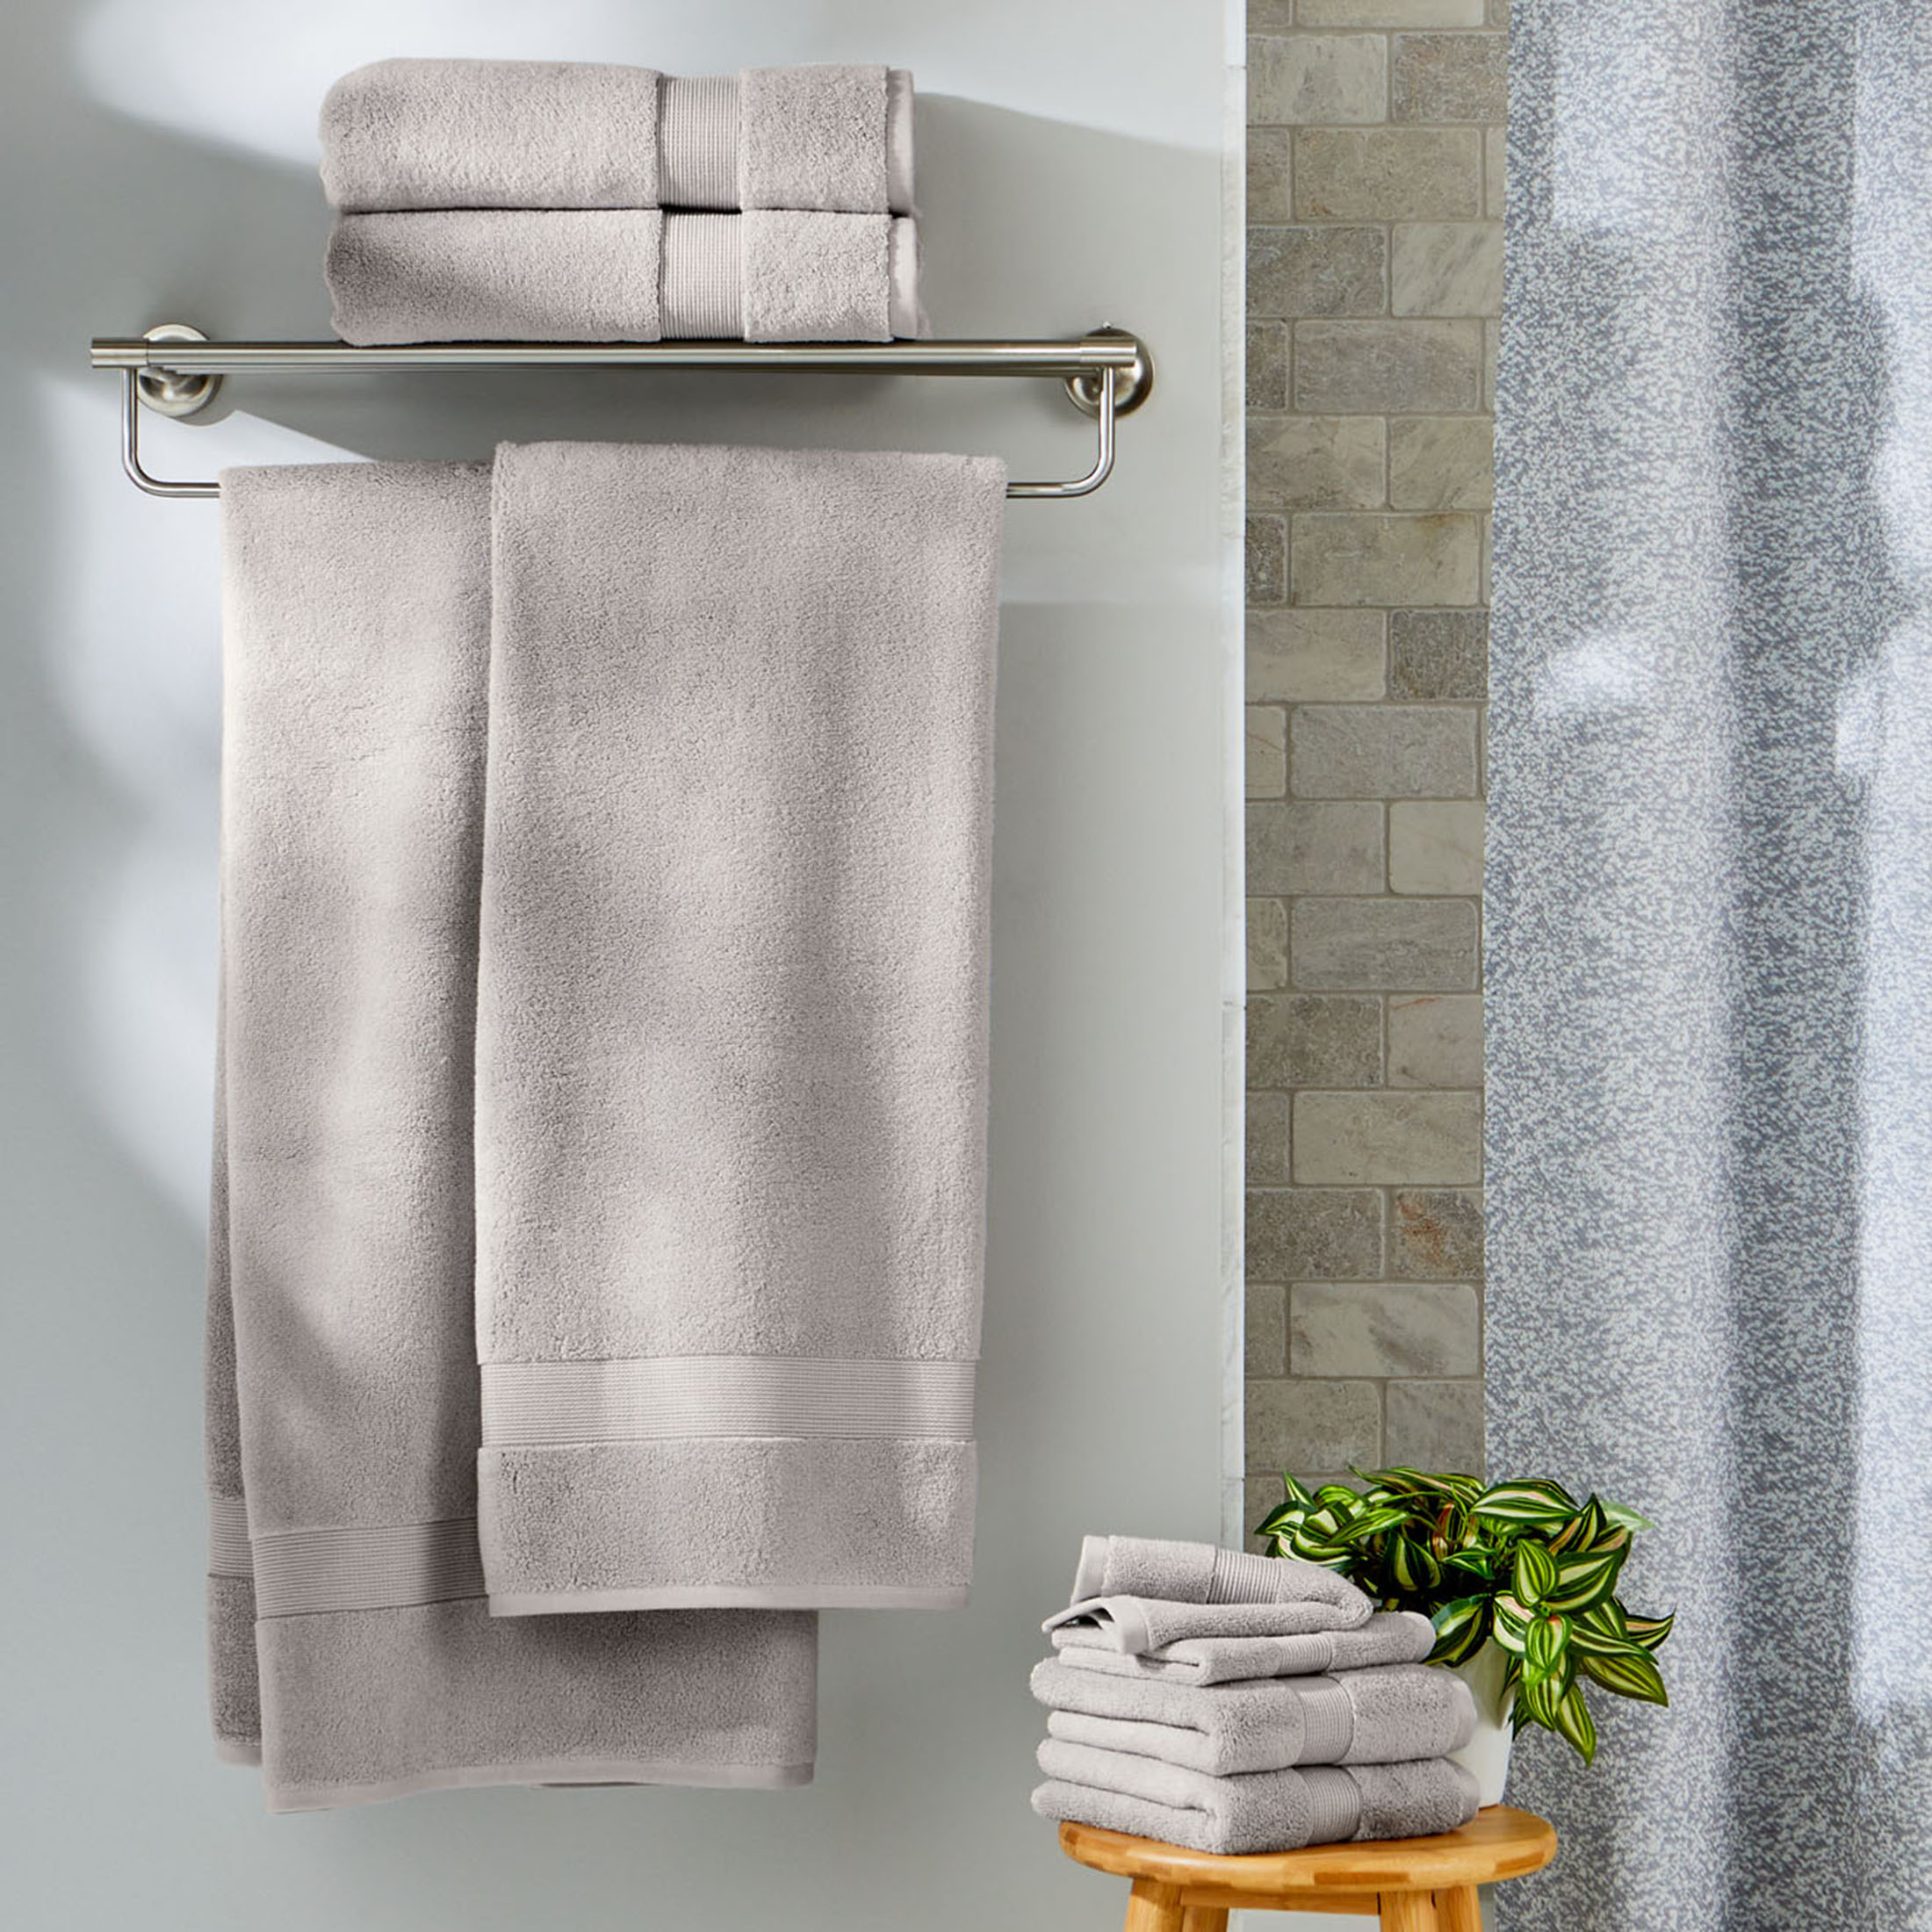 Better Homes & Gardens Signature Soft Hand Towel, Soft Silver - image 2 of 6